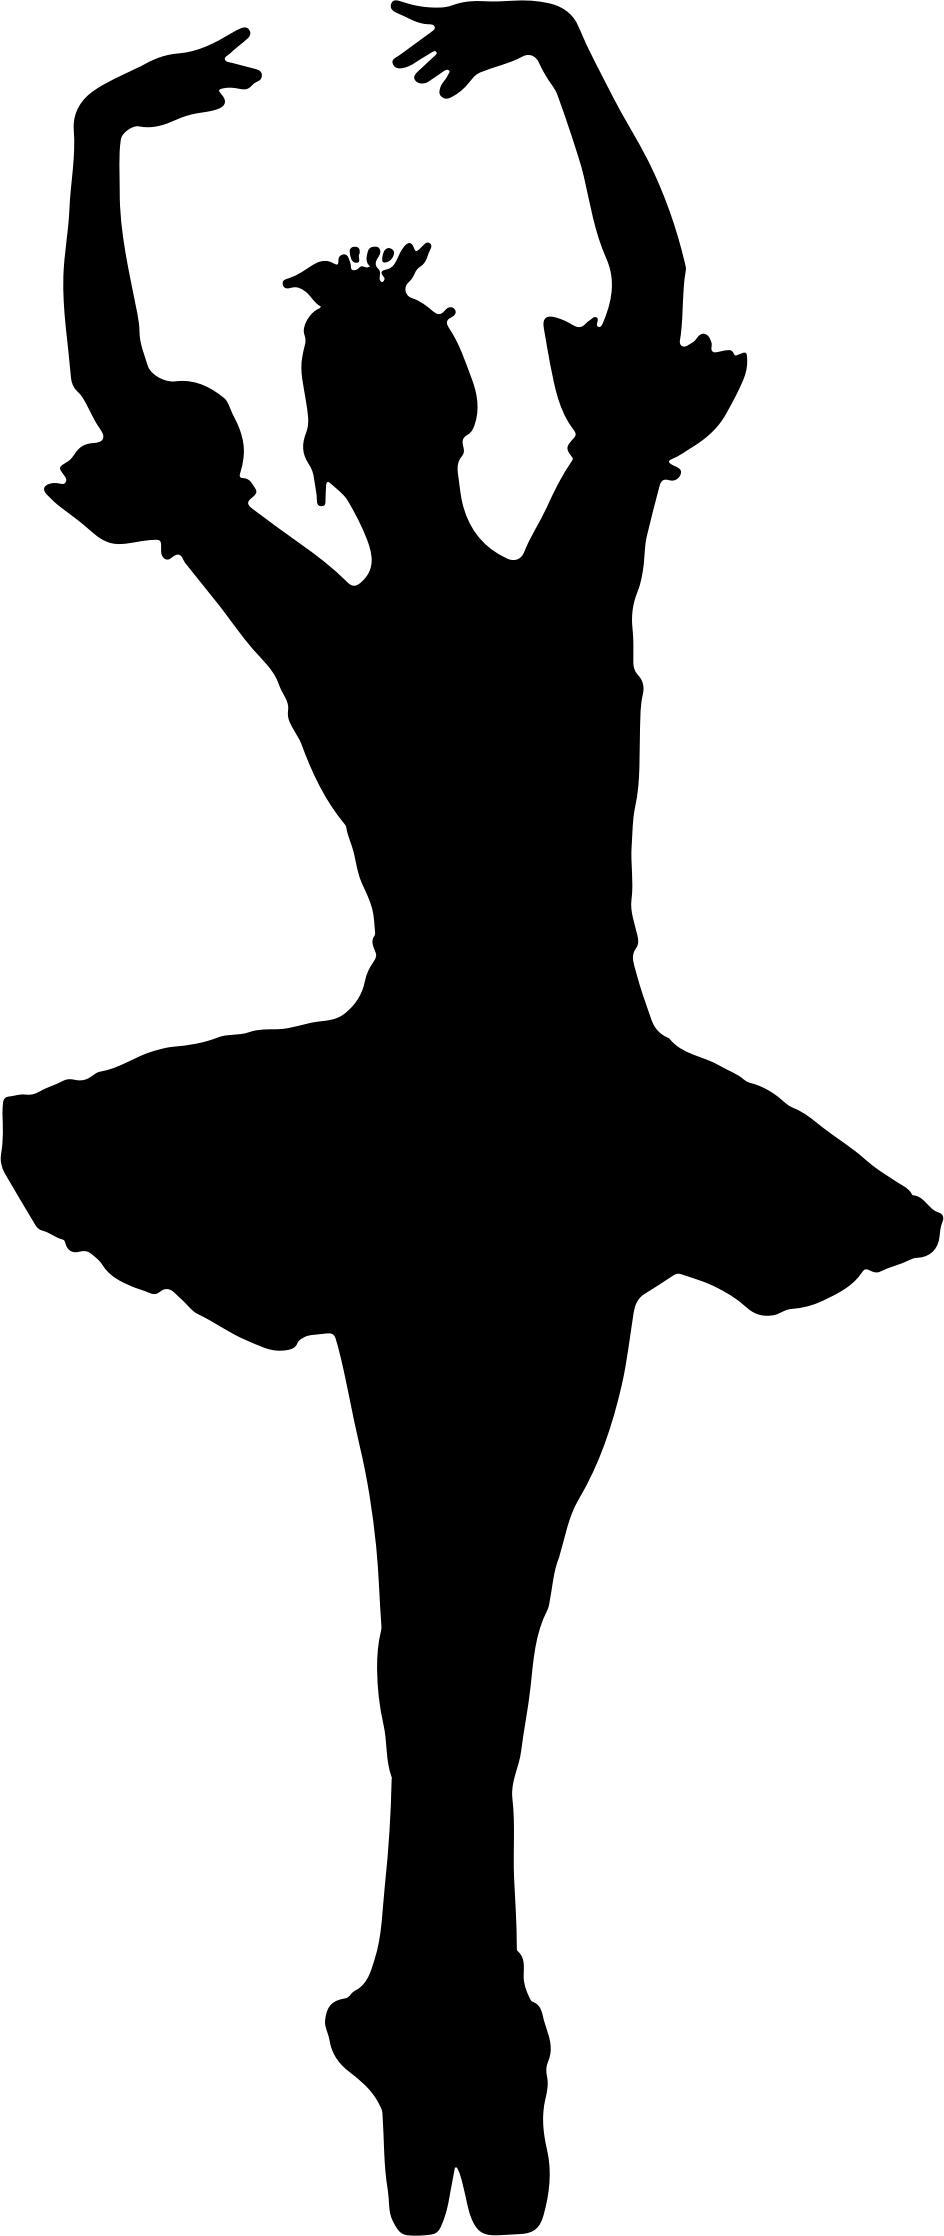 Arms Raised Ballerina Silhouette png transparent